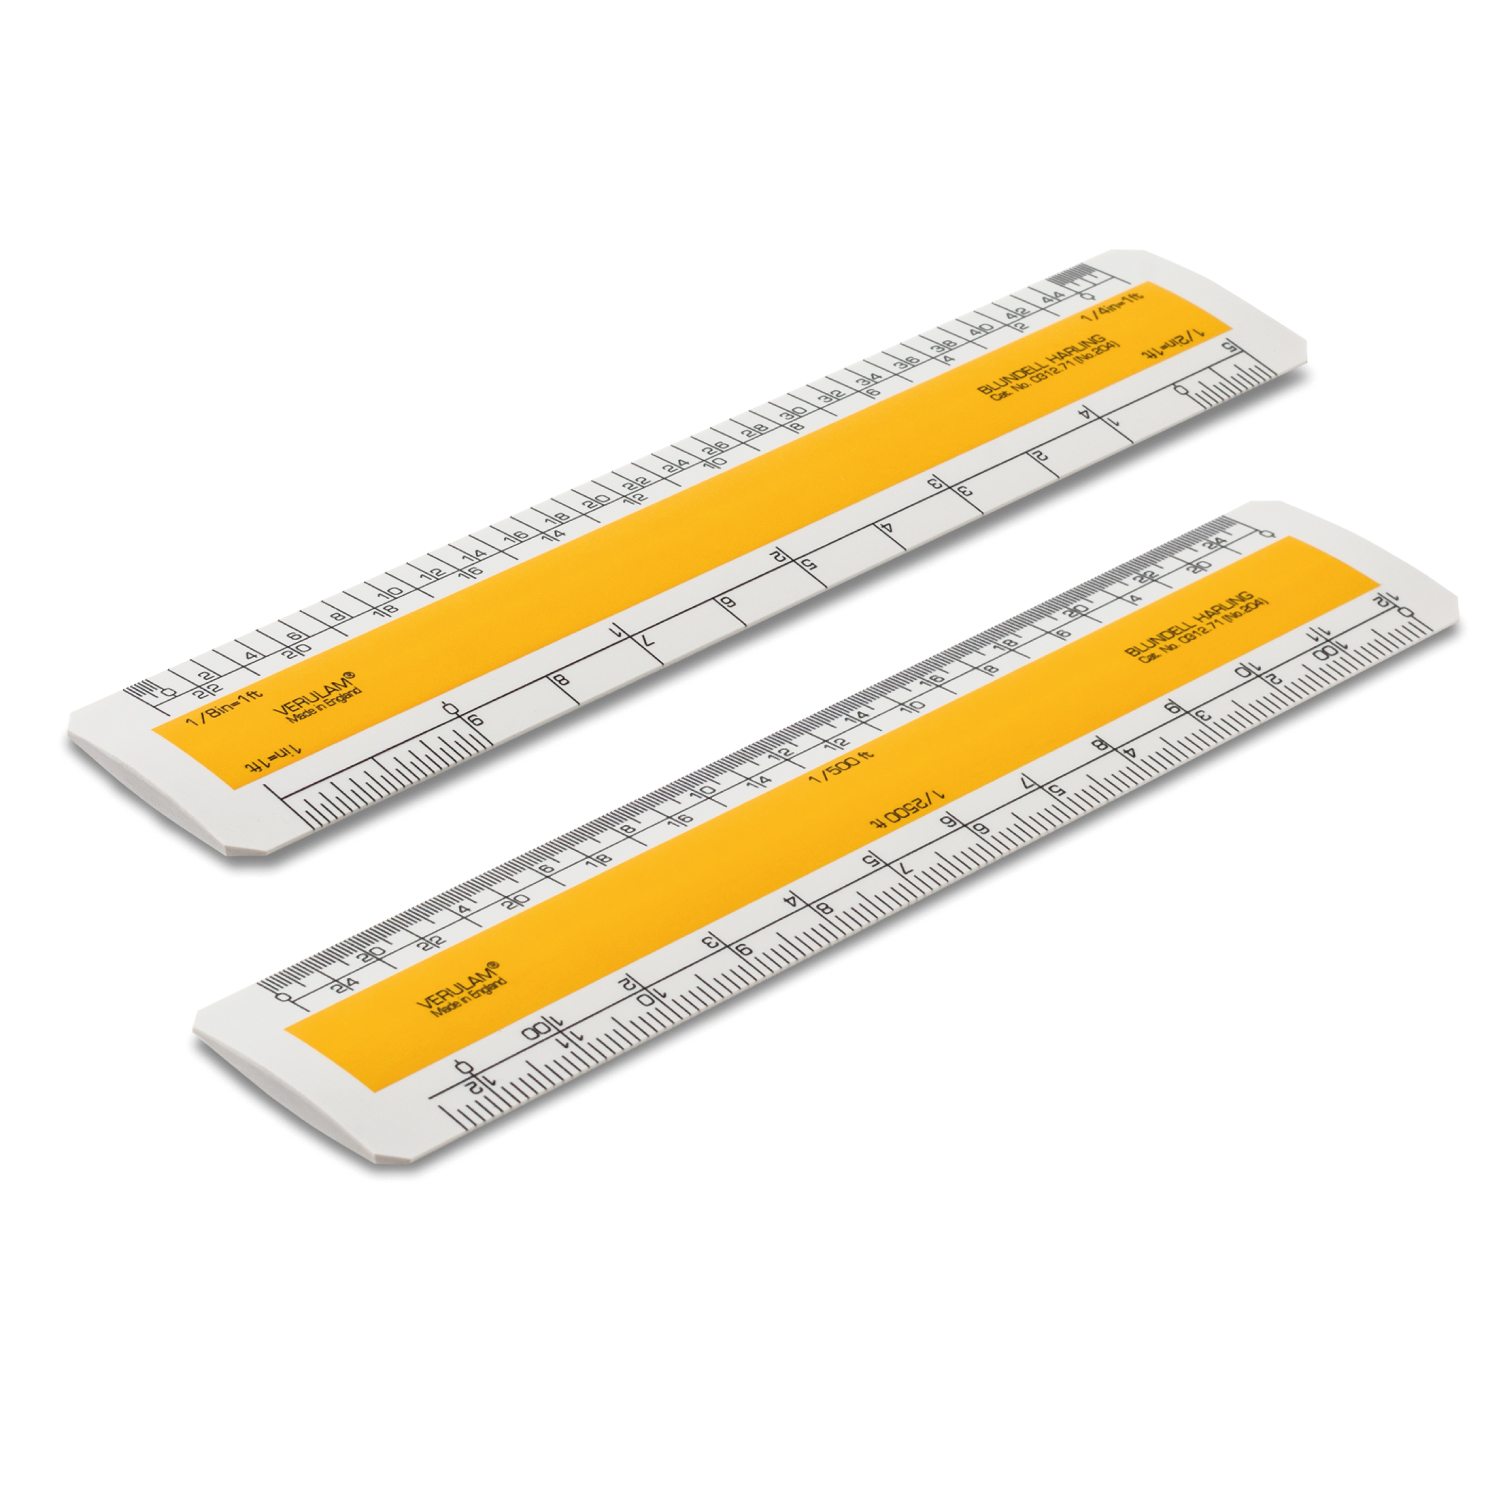 6 inch Verulam imperial flat oval scale ruler - no.204 architects scales